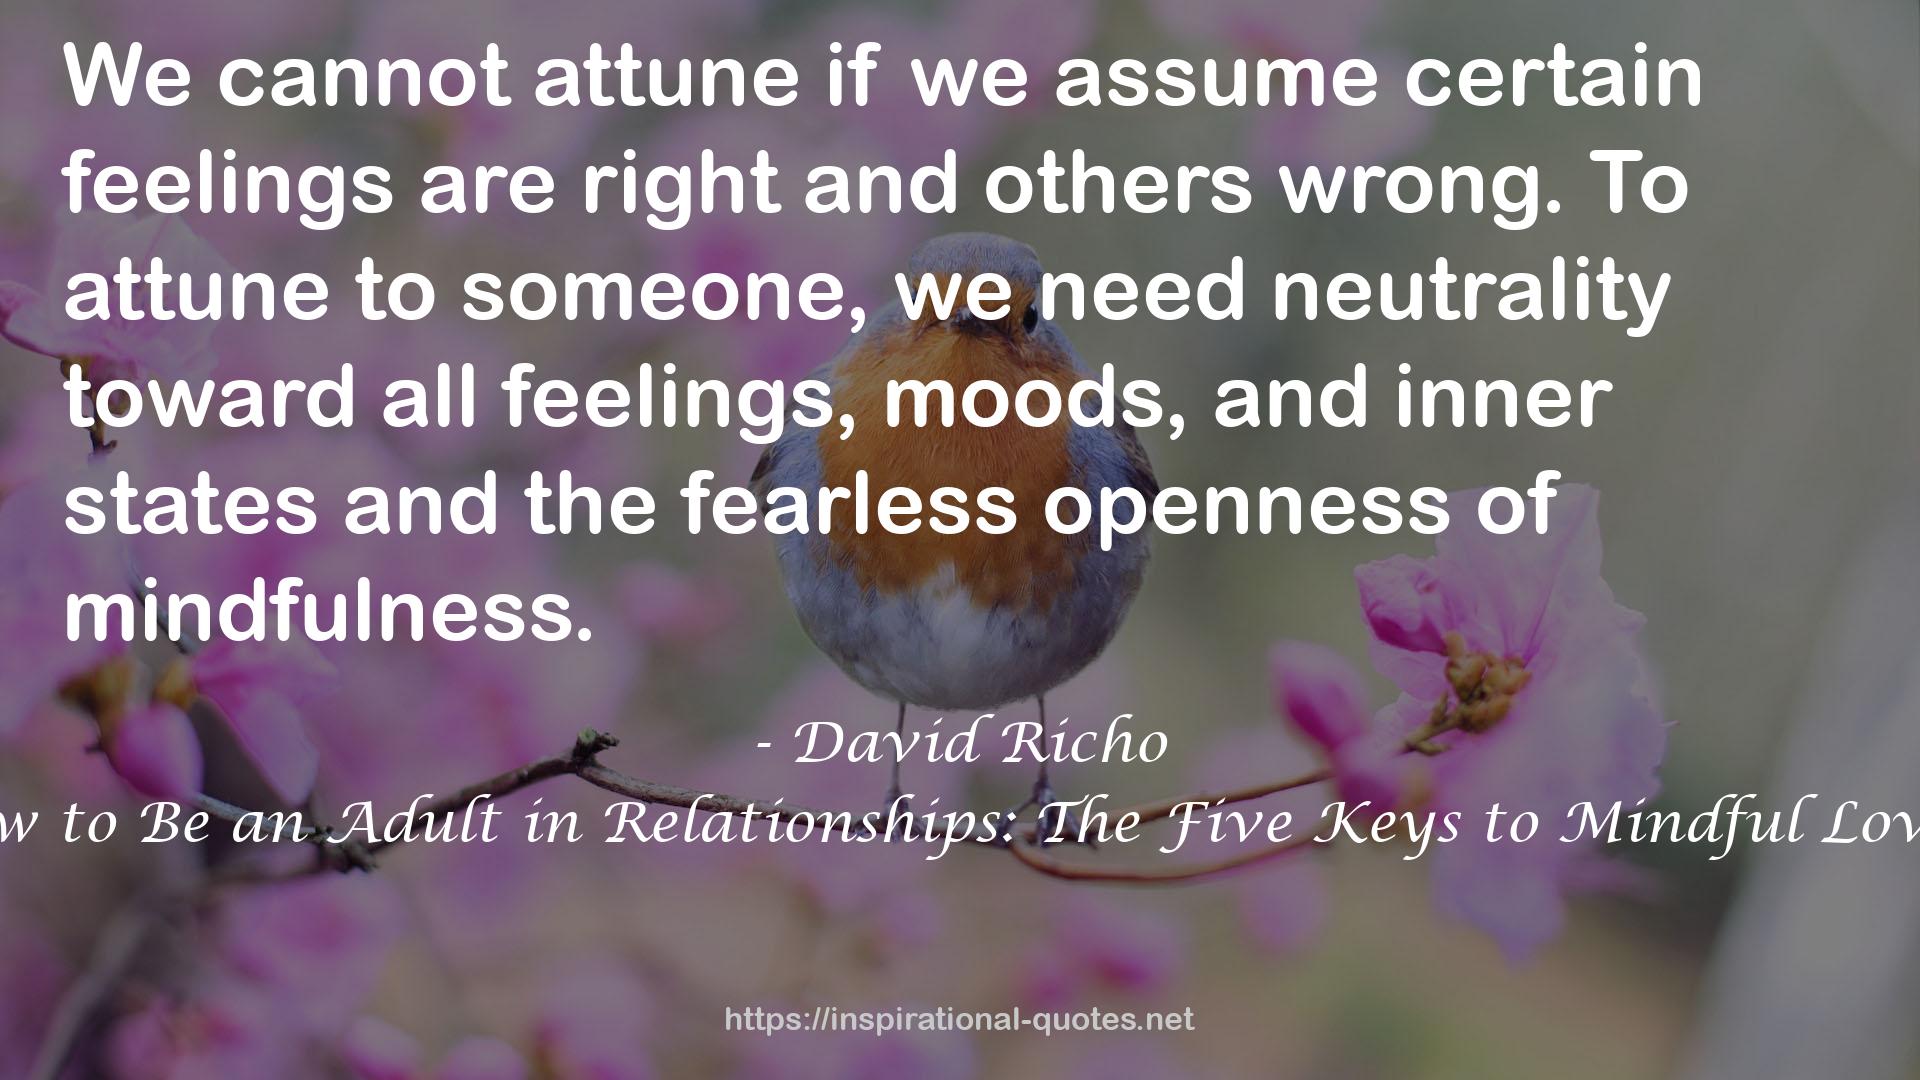 How to Be an Adult in Relationships: The Five Keys to Mindful Loving QUOTES